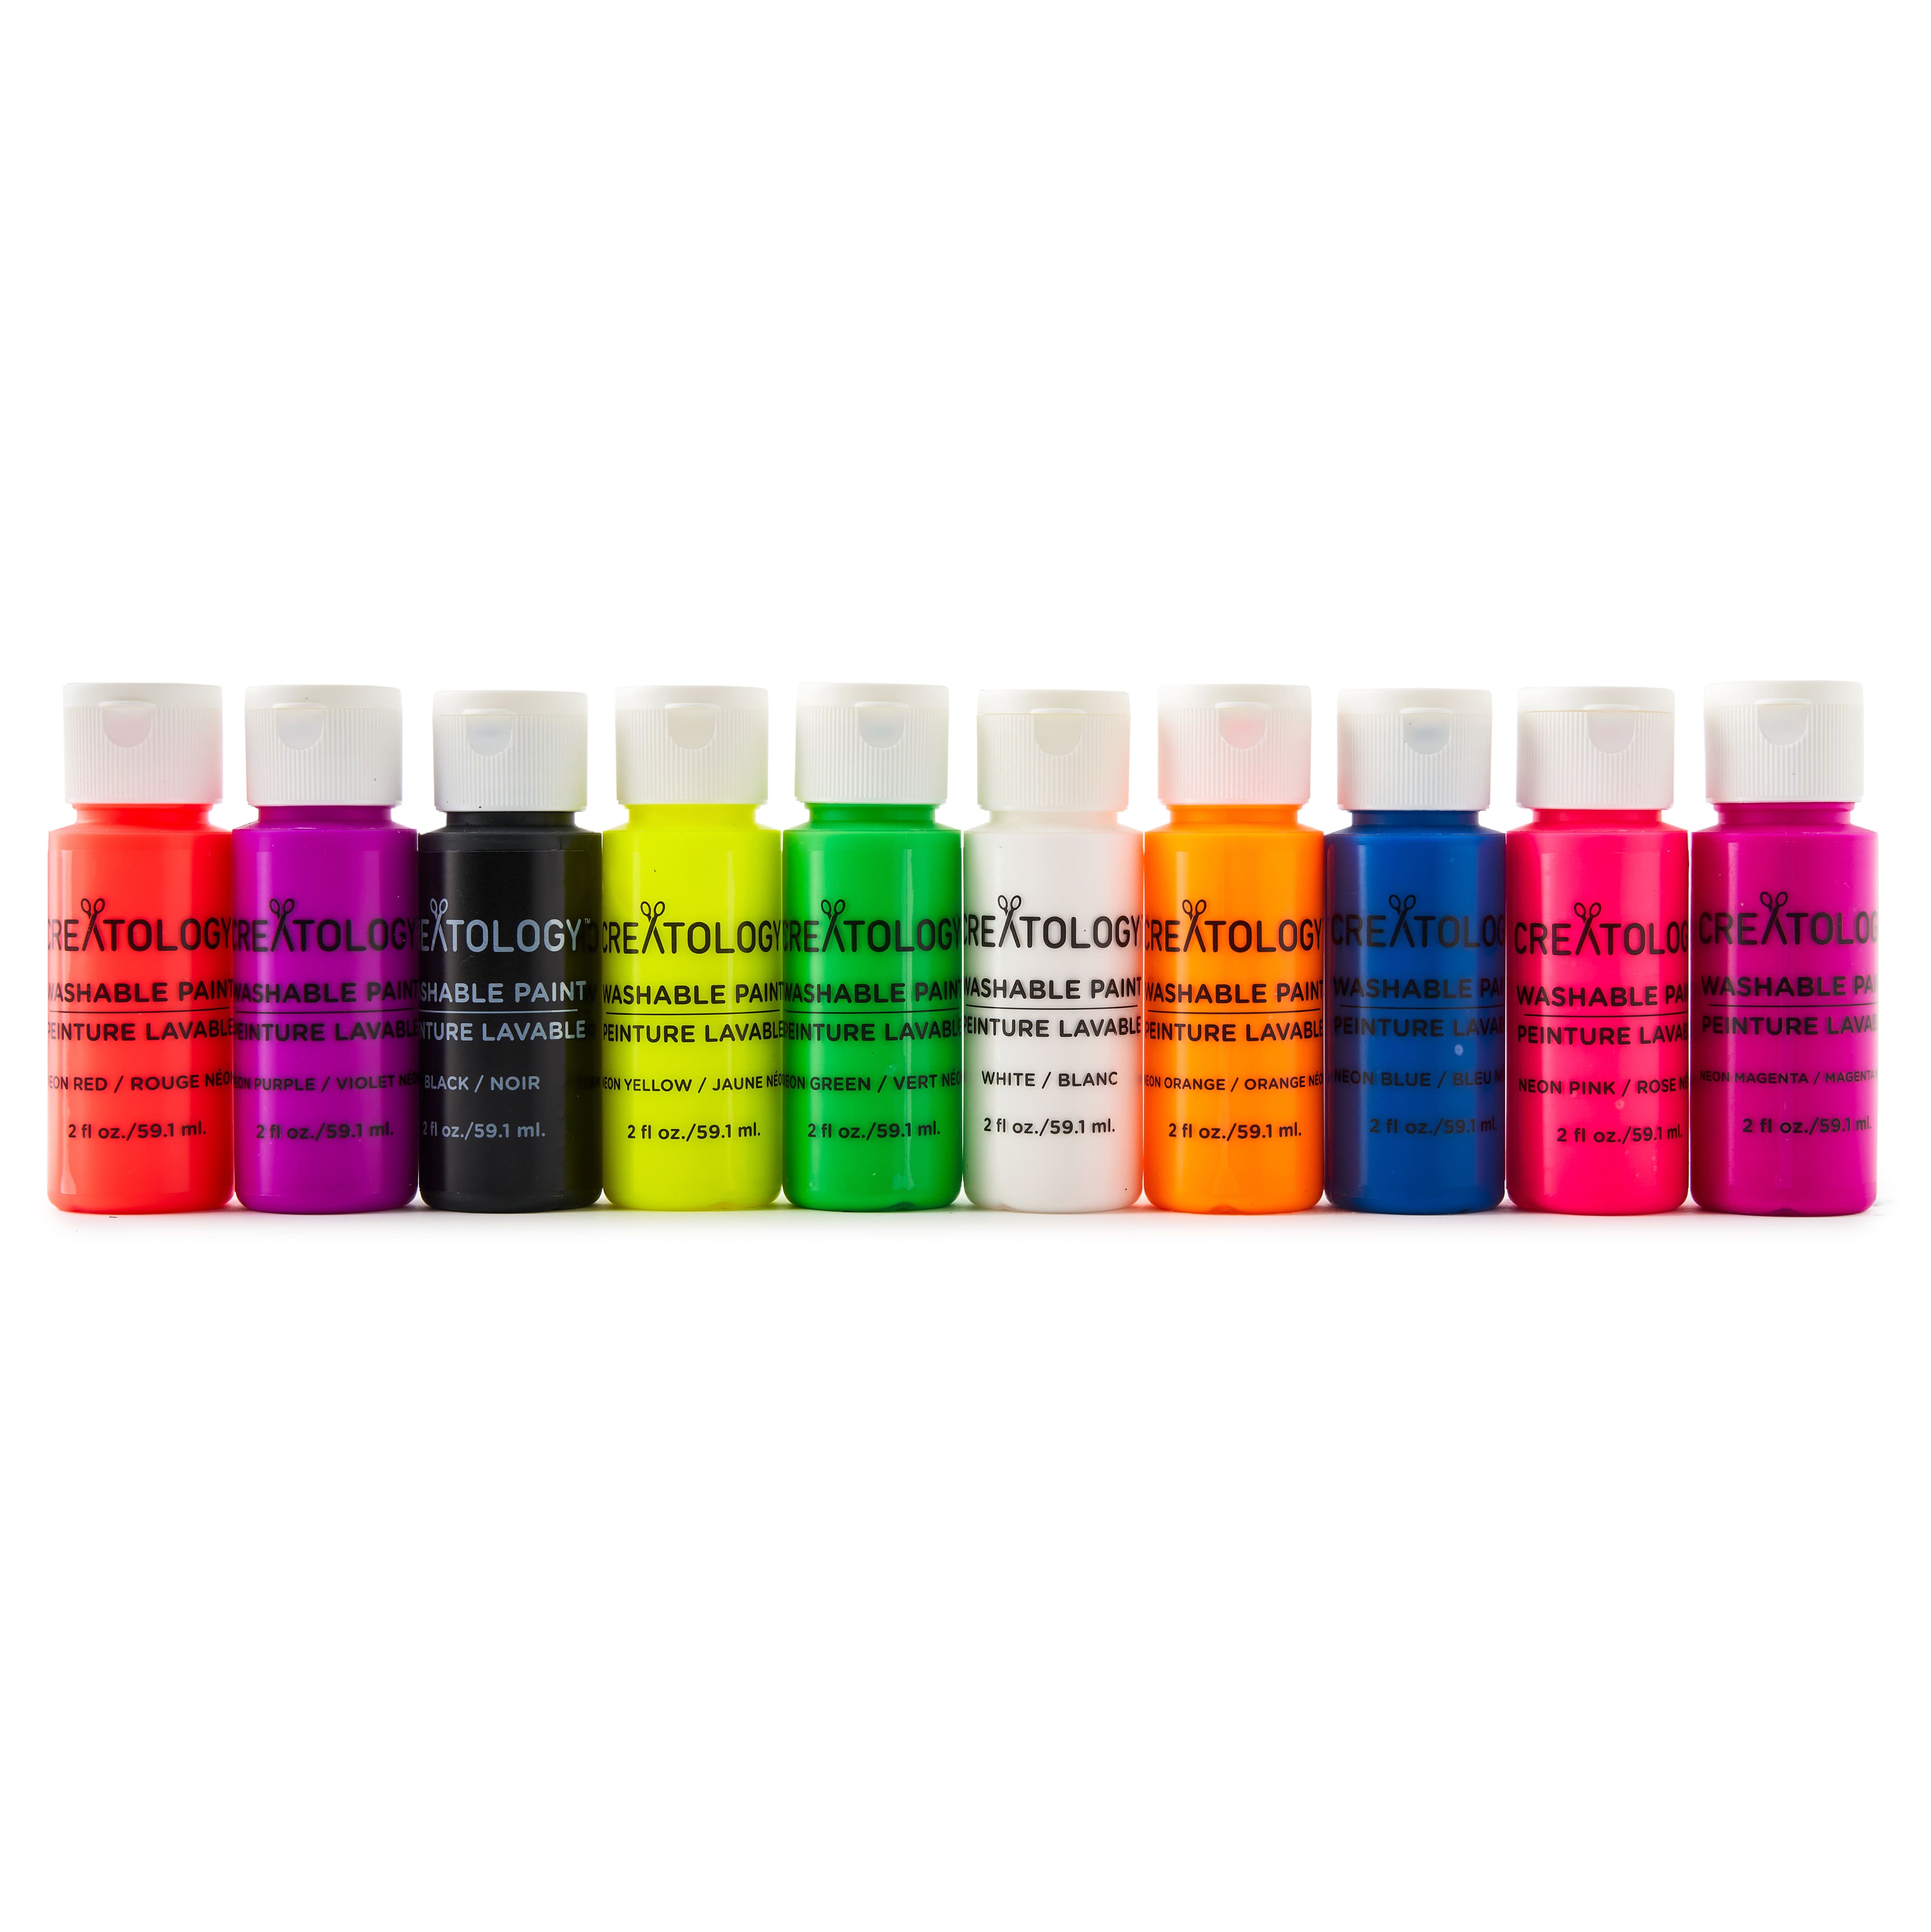 Primary Colors Washable Paint Set by Creatology™